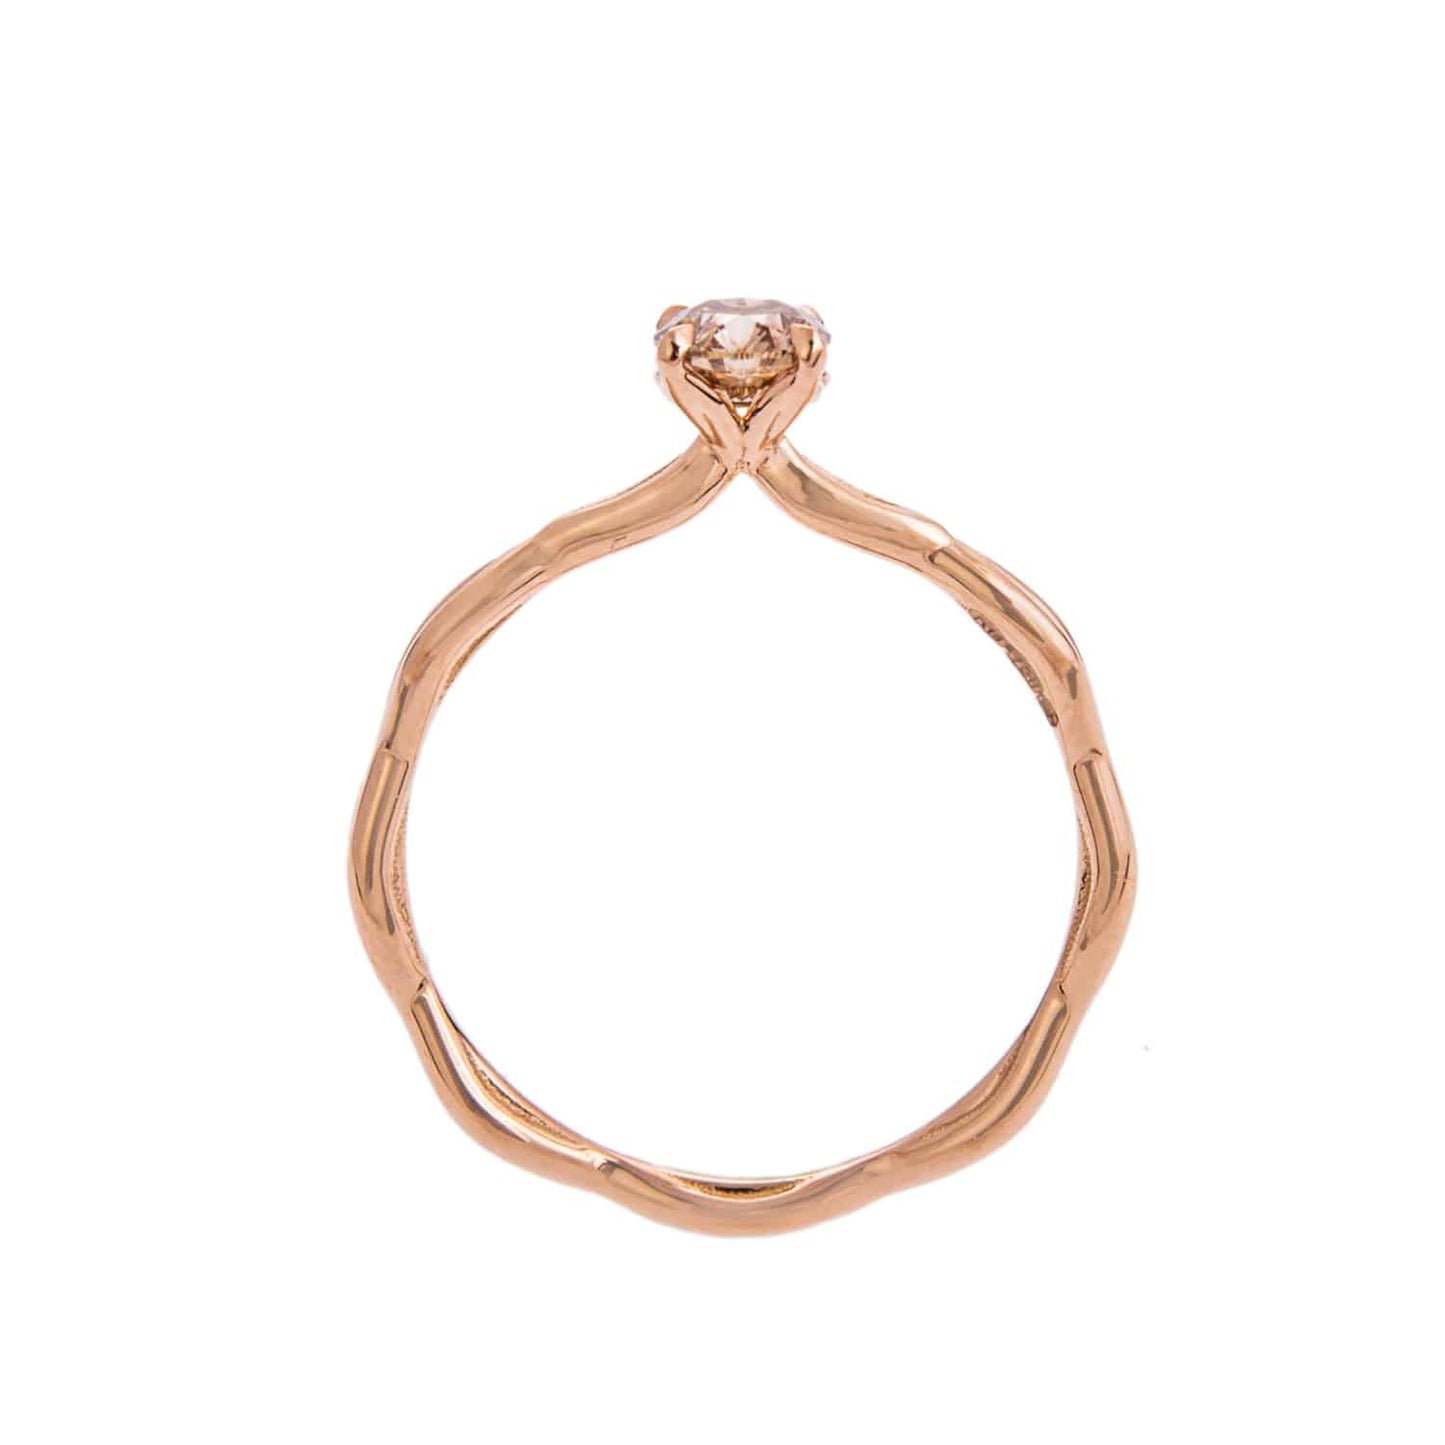 KATHARINE DANIELS Rosebud diamond solitaire ring- 18ct rose gold and champagne diamond ring 0.40ct round champagn diamond